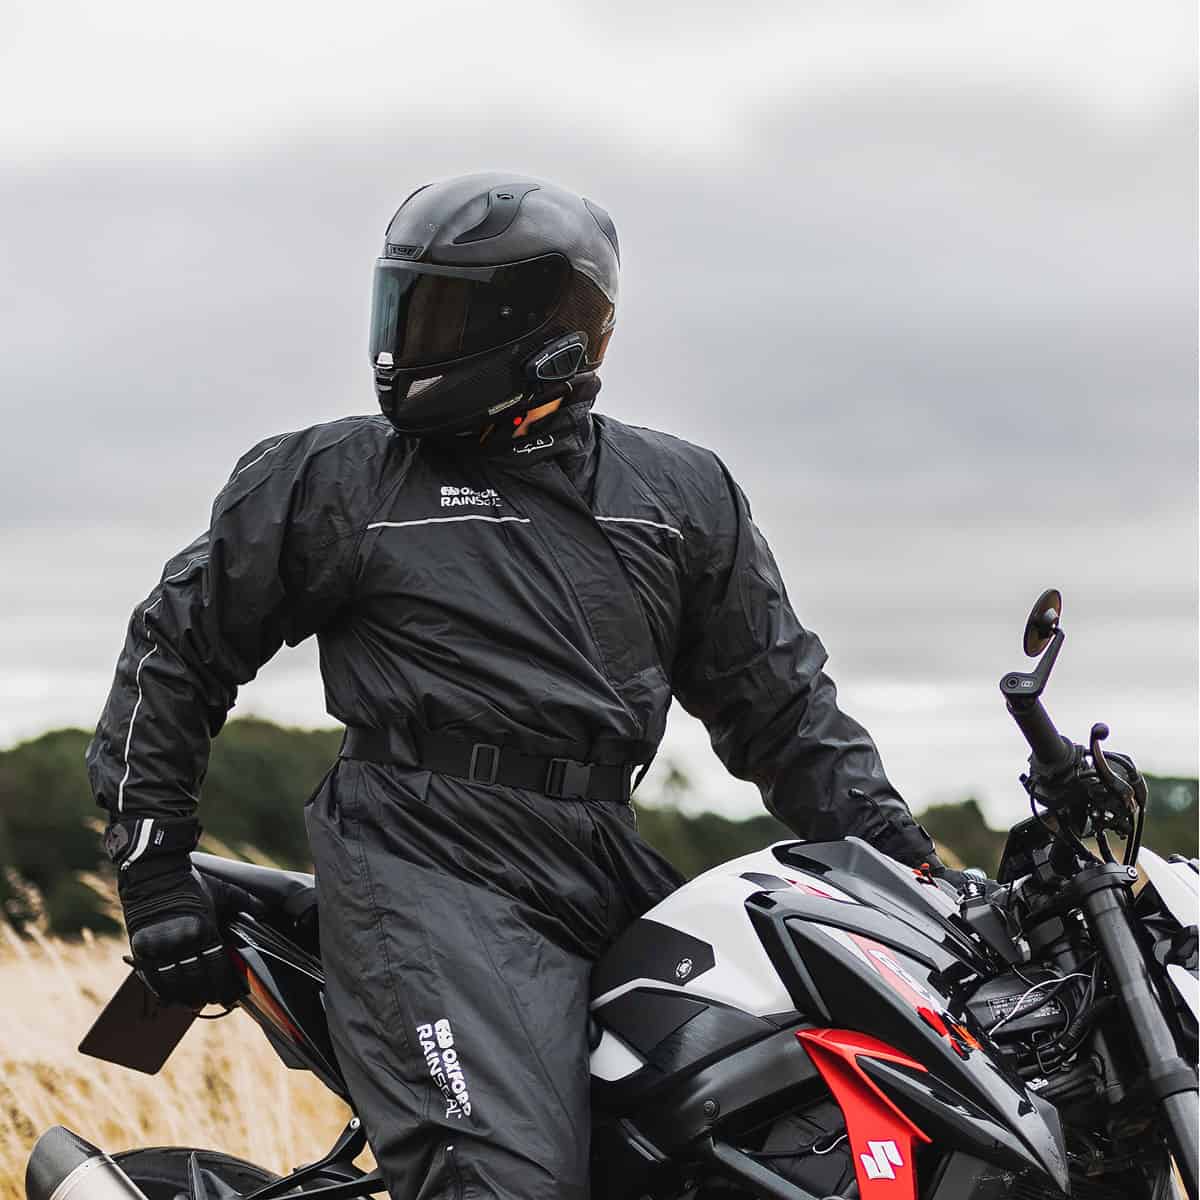 Oxford Rainseal Over Suit WP - Black lifestyle on bike